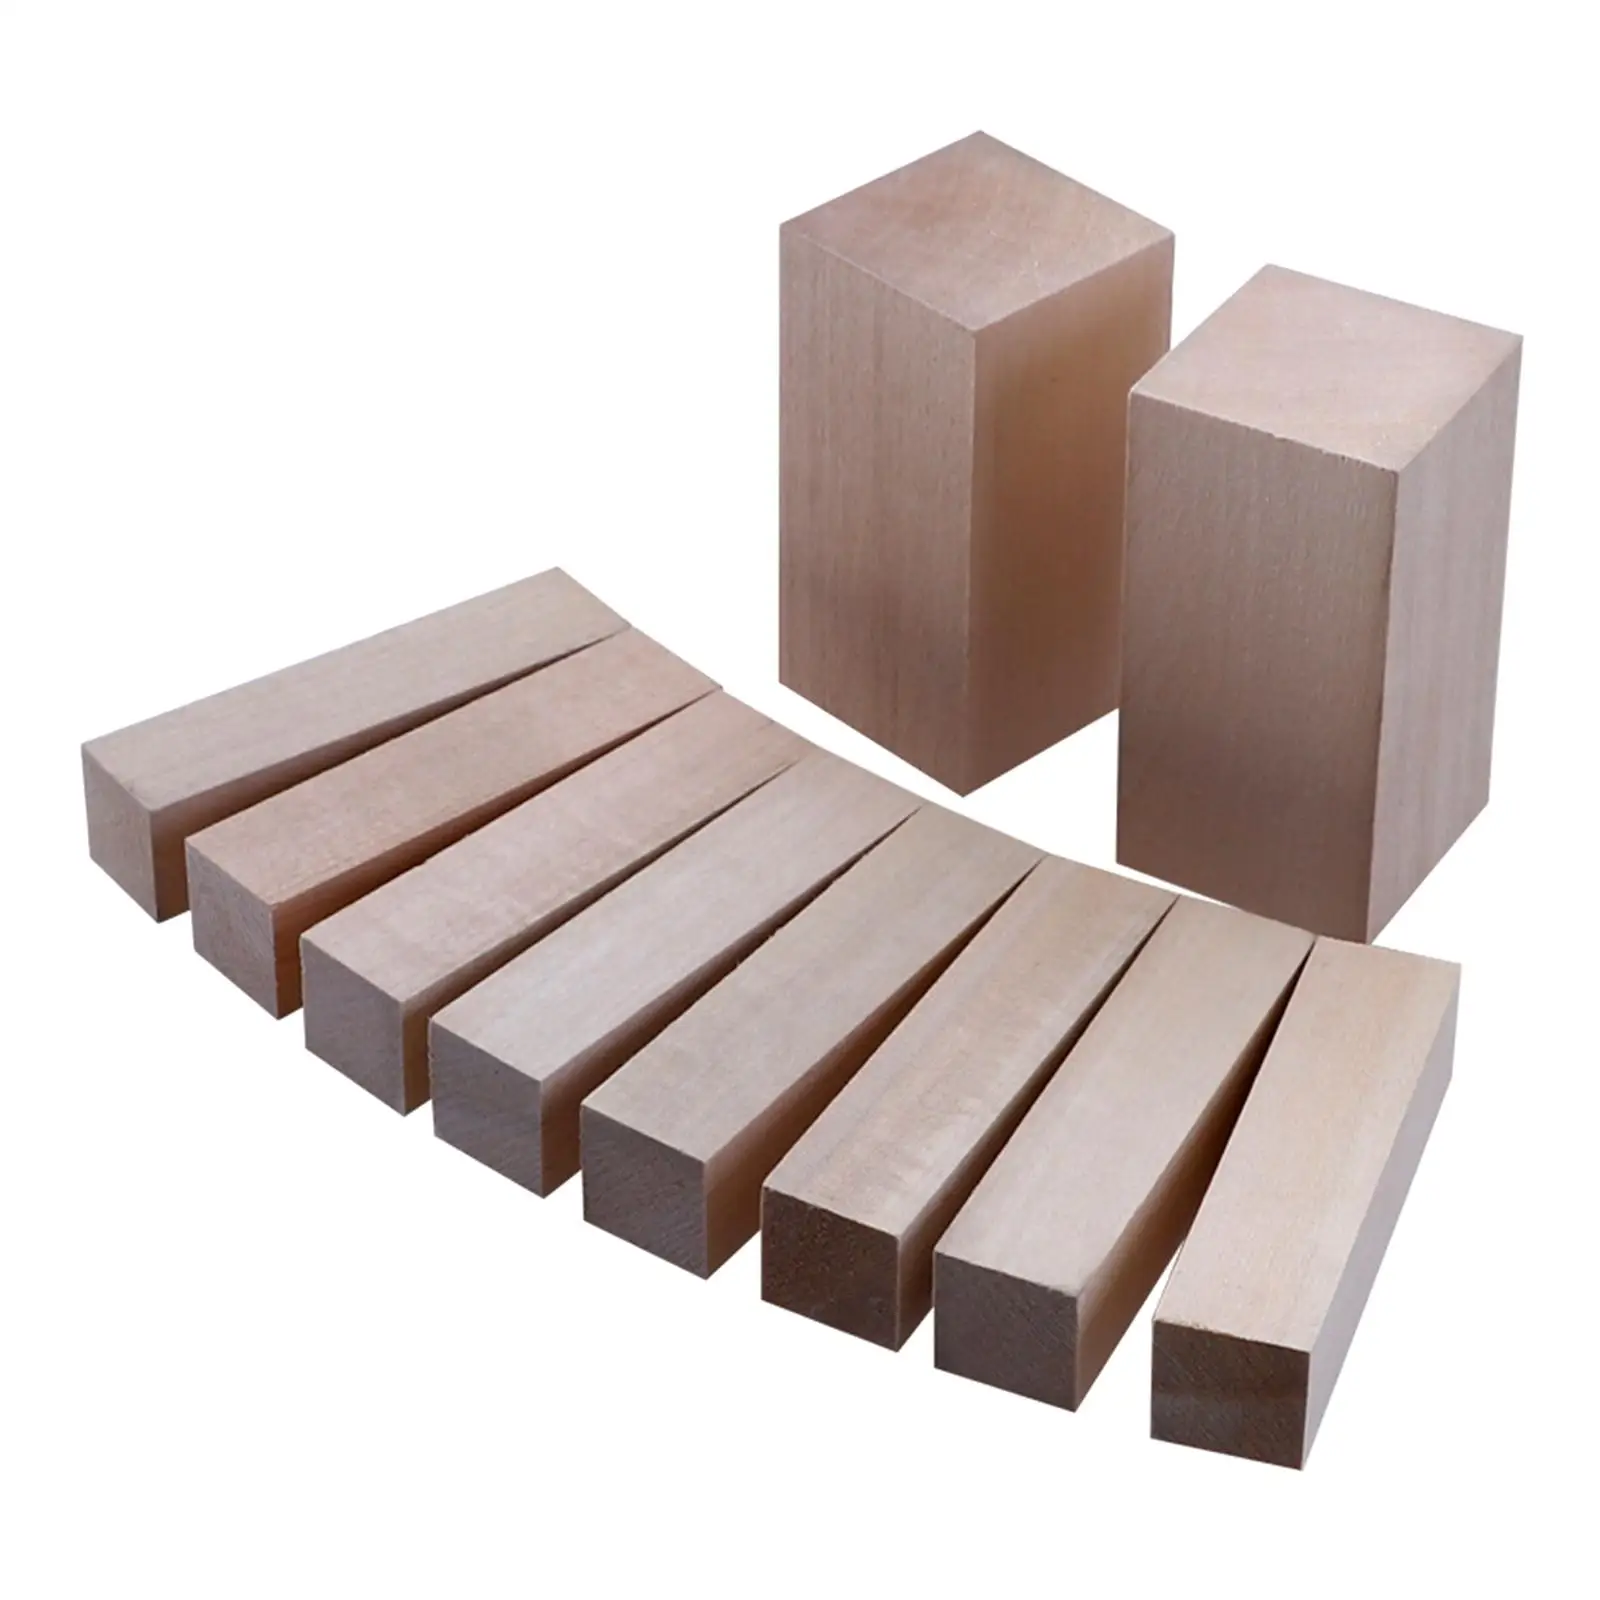 10Pcs Basswood Carving Blocks Unfinished Wood Blocks Linden Hand Carving Turning Blanks Wood Whittling Kit for Kids Adults